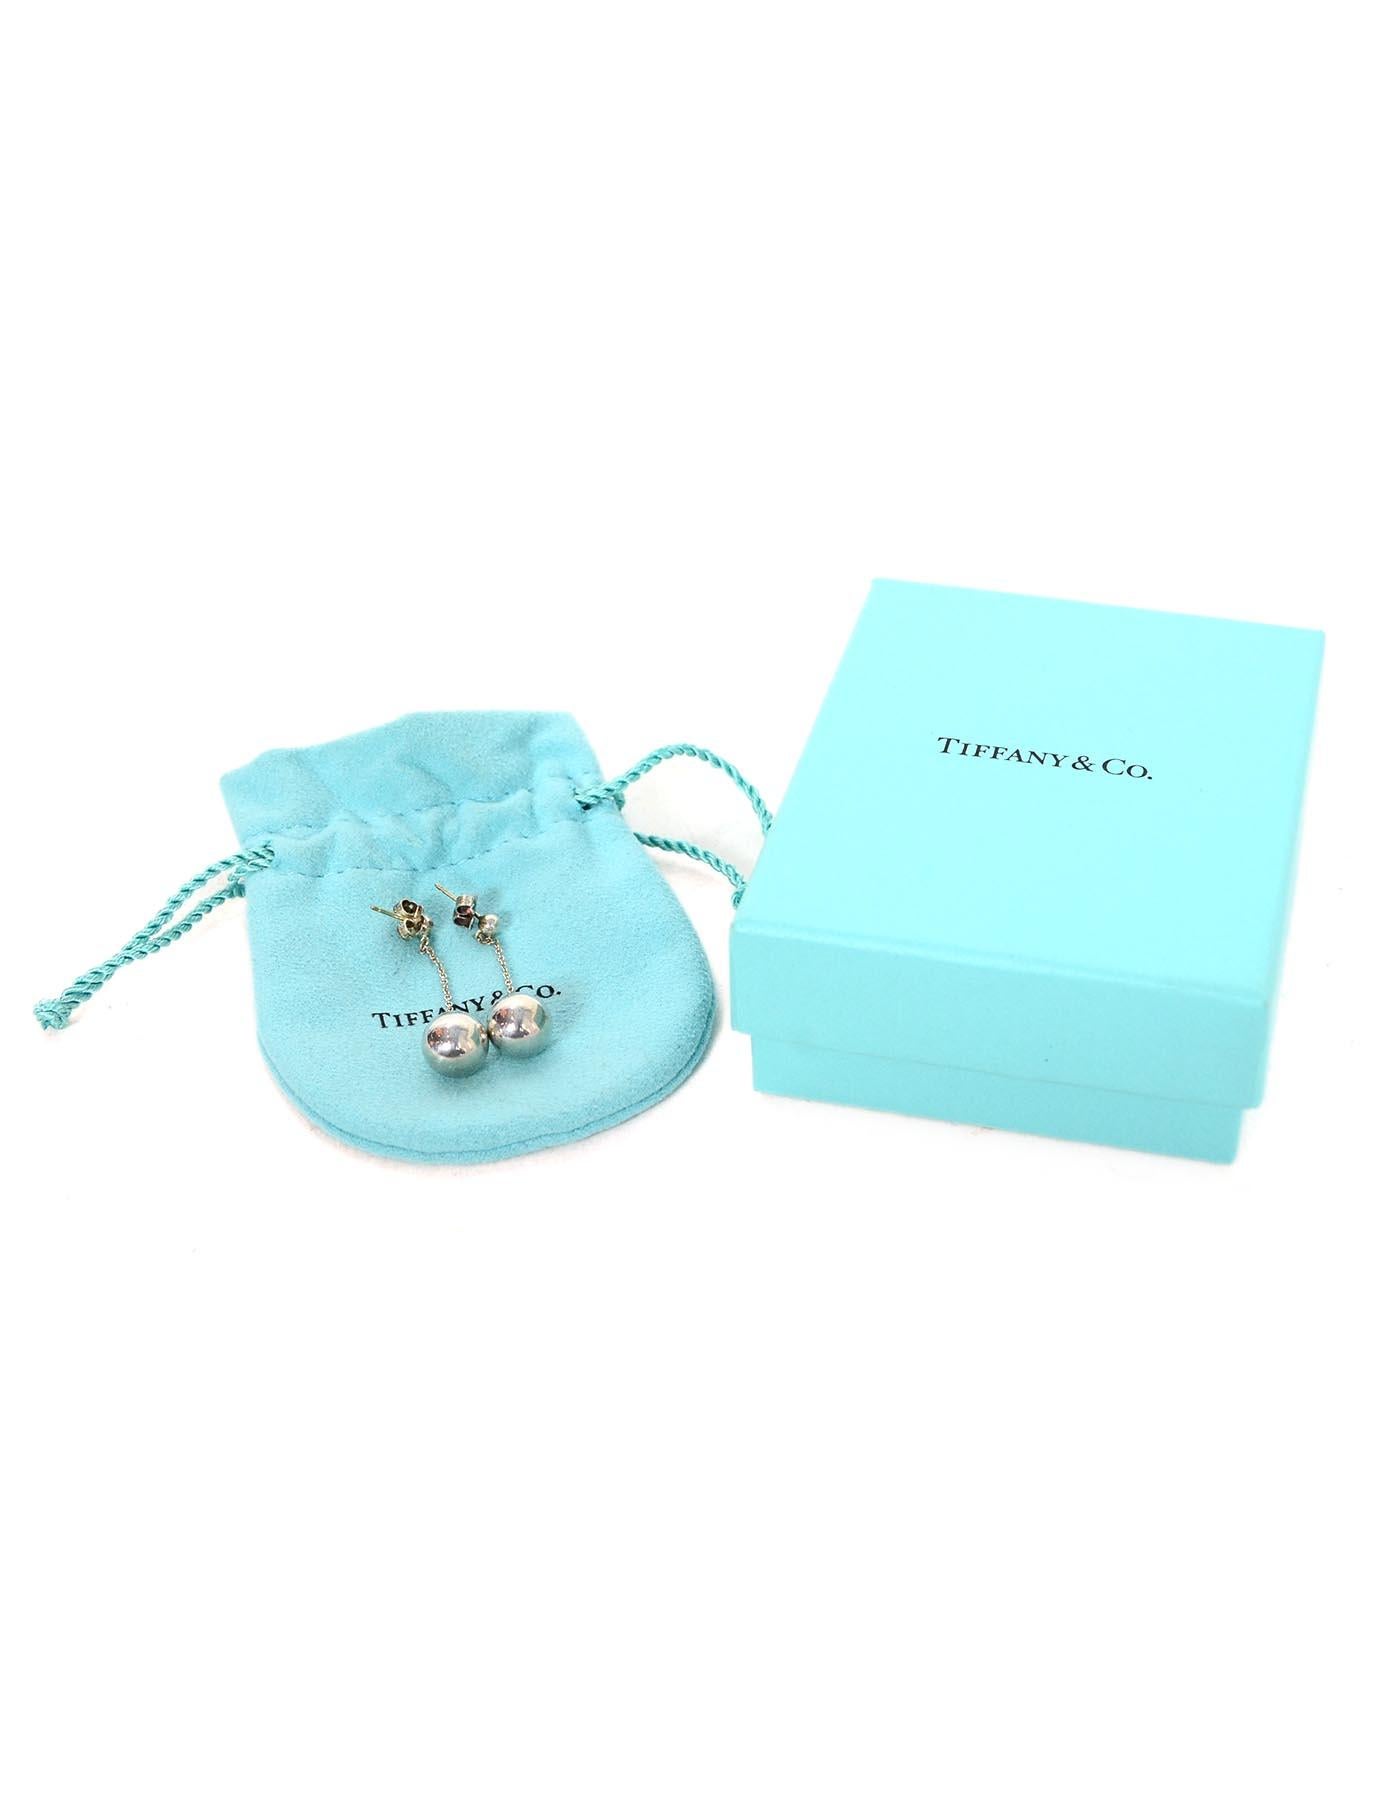 Tiffany & Co Sterling Silver Ball Drop Earrings W/ Box

Color: Silver
Materials:  Sterling silver
Hallmarks:  On back clasp- 